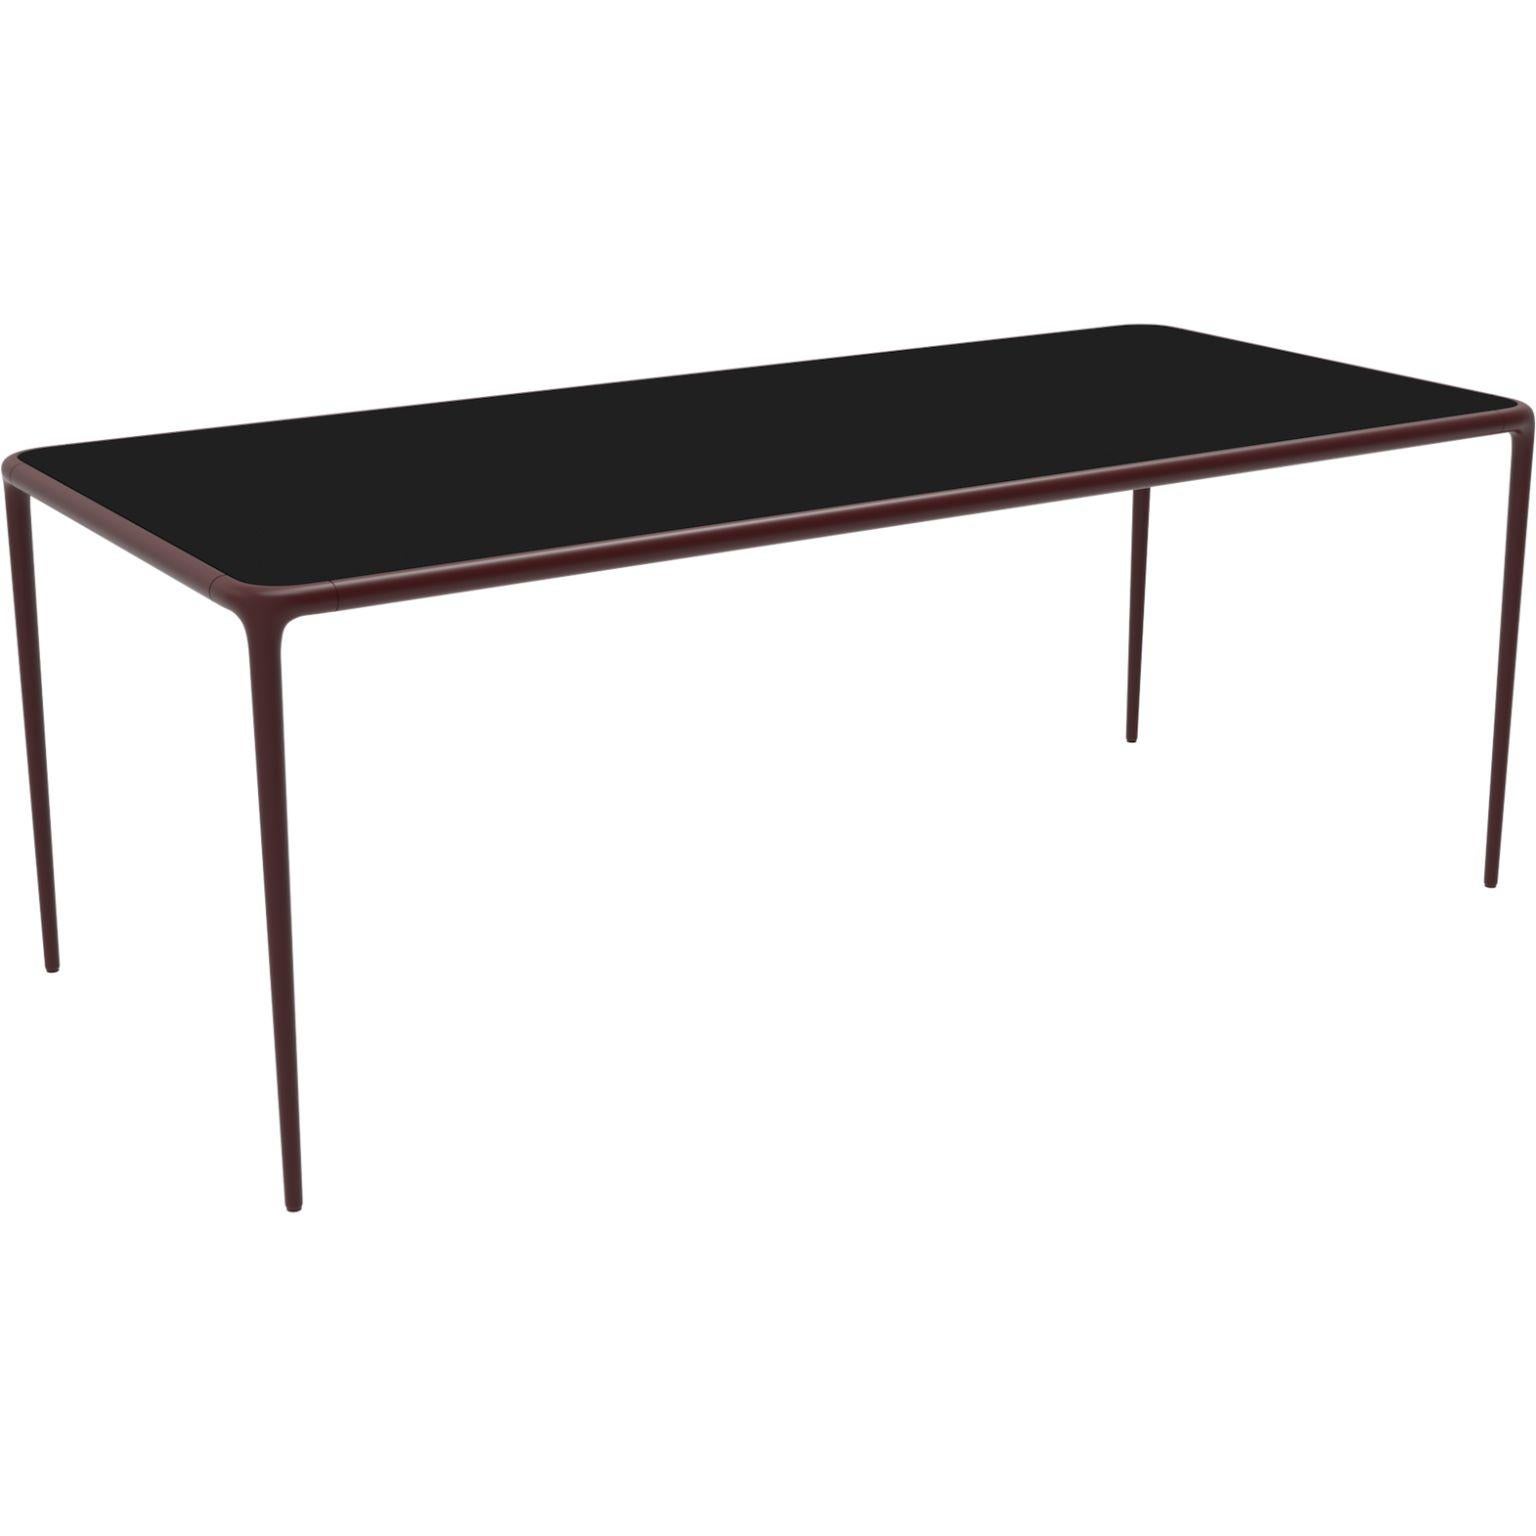 Xaloc burgundy glass top 200 table by MOWEE
Dimensions: D200 x W90 x H74 cm
Material: Aluminium, tinted tempered glass top.
Also available in different aluminum colors and finishes (HPL Black Edge or Neolith). 

Xaloc synthesizes the lines of